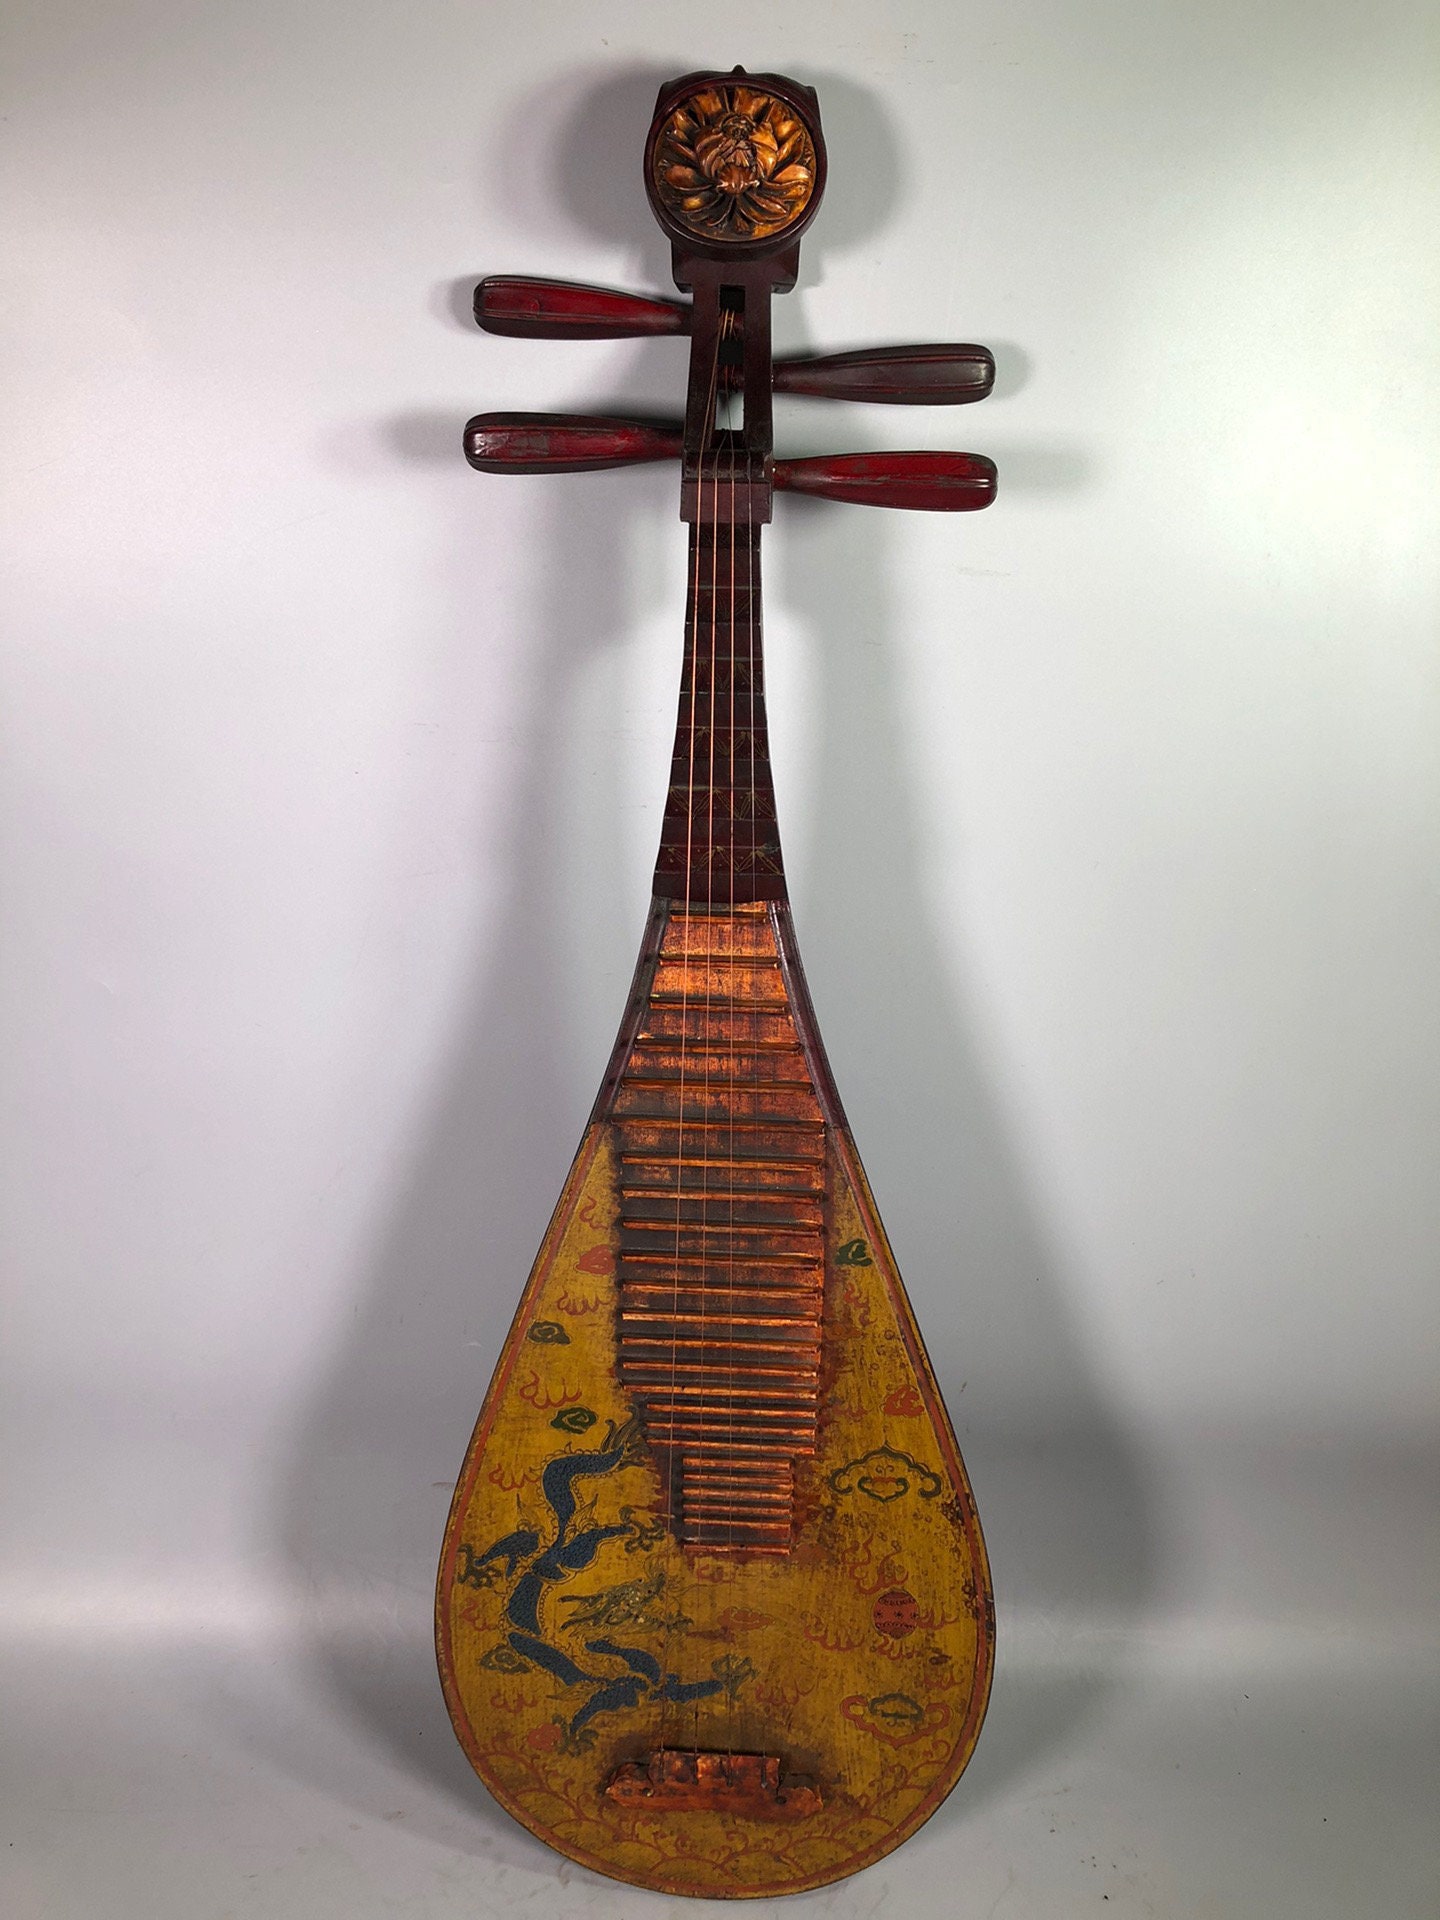 Antique Asian music instrument, pipa, hung in wall in a music